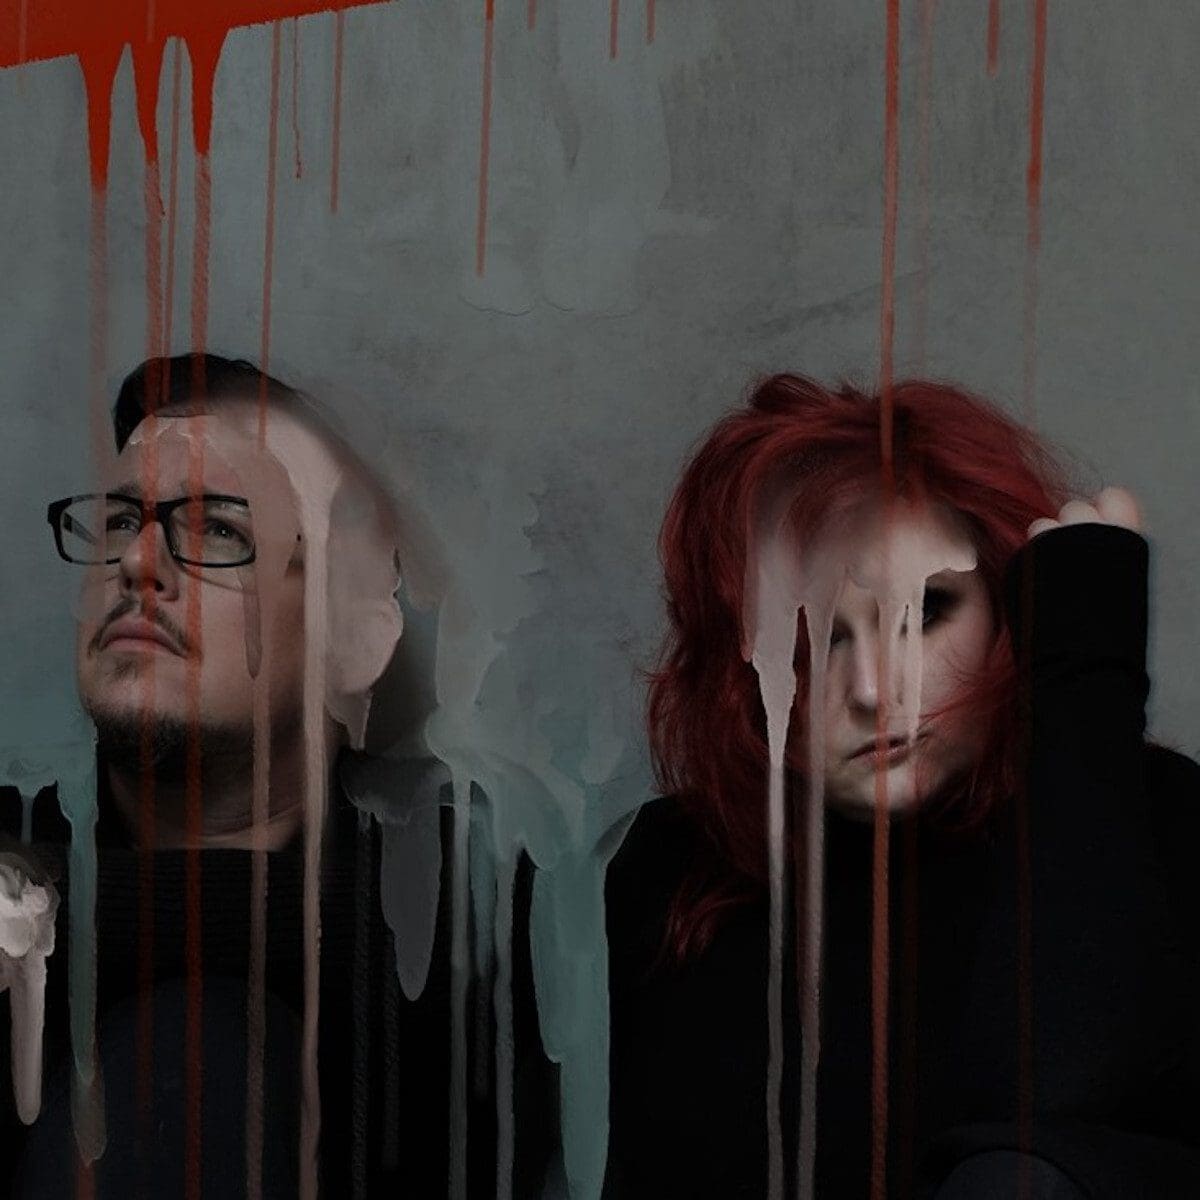 L’âme Immortelle to return with all new album 'In tiefem Fall' on January 2022